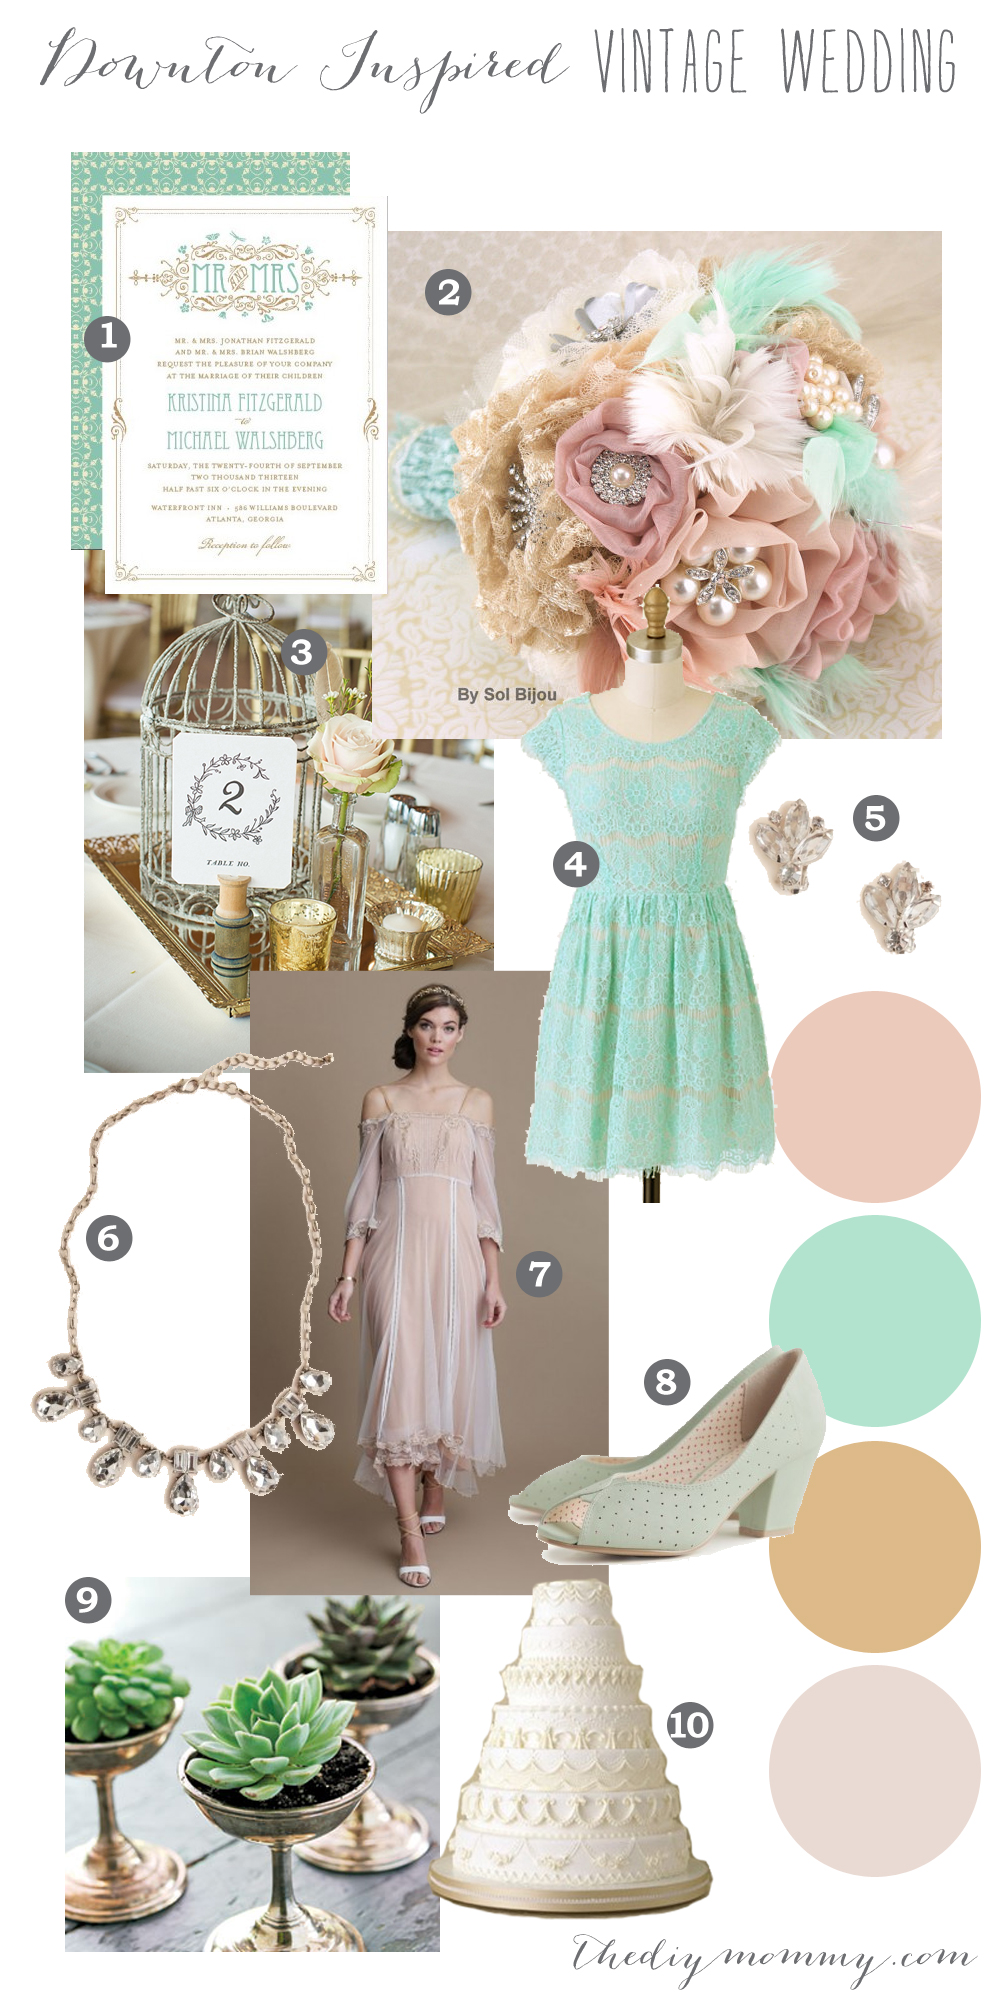 A Downton Abbey Inspired Vintage Wedding Mood Board. Colours of blush, mint and ivory are teamed with vintage inspired jewels, dresses, a fabric bouquet, birdcage centerpieces, and art deco invitations.